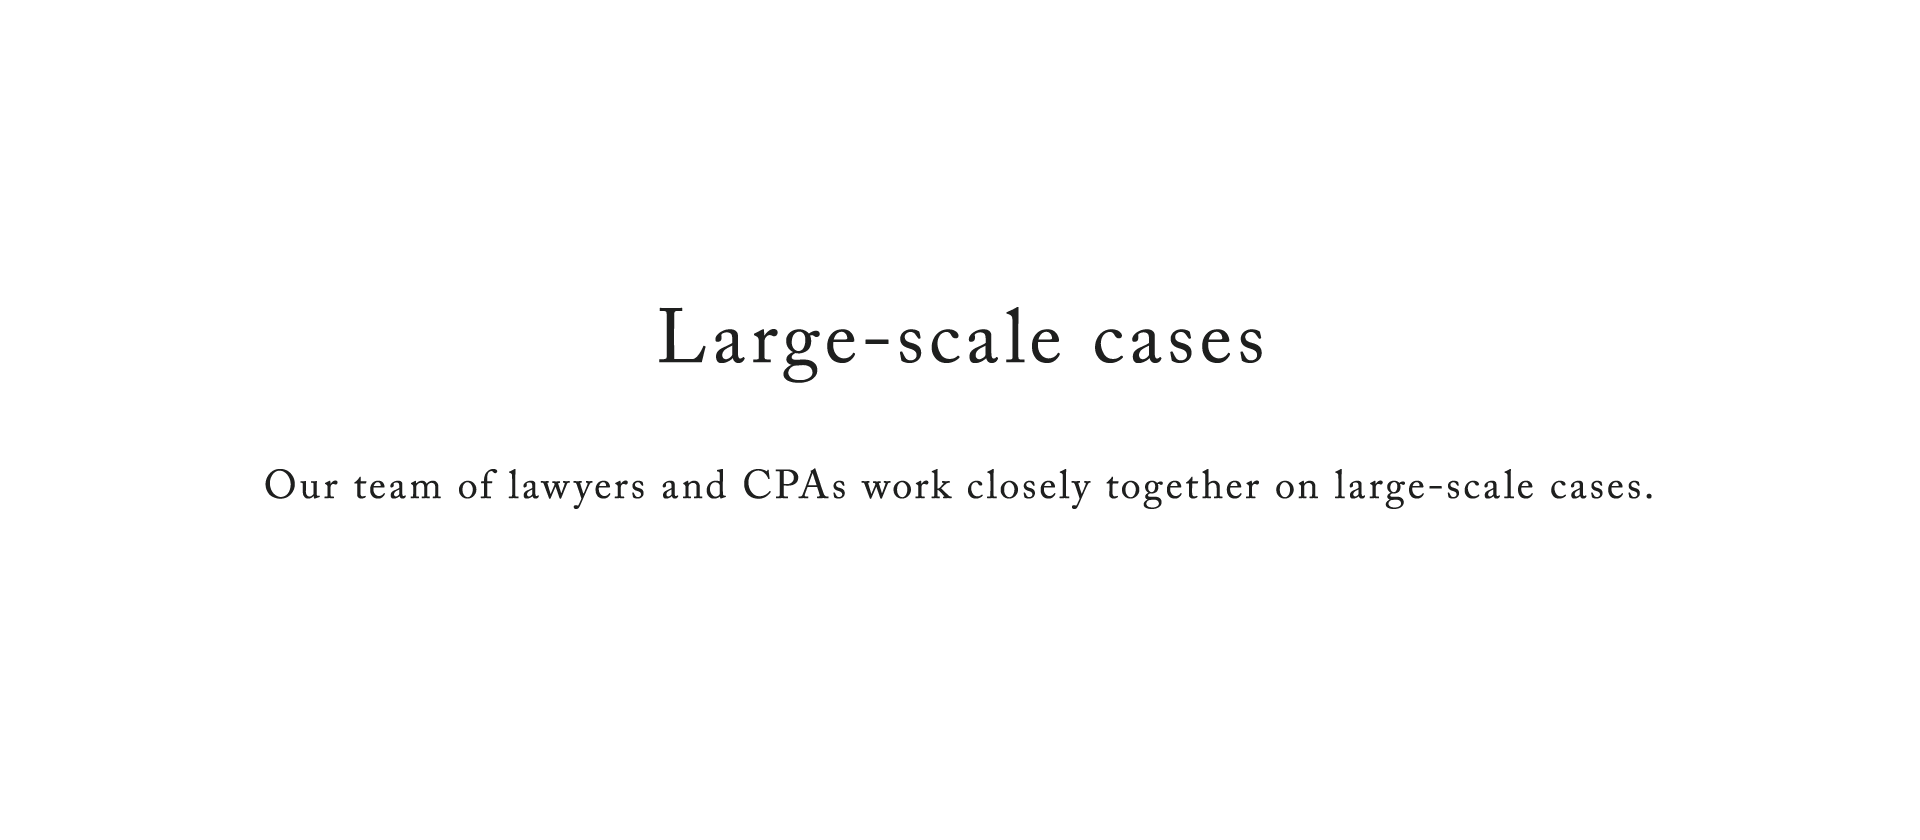 Large-scale cases